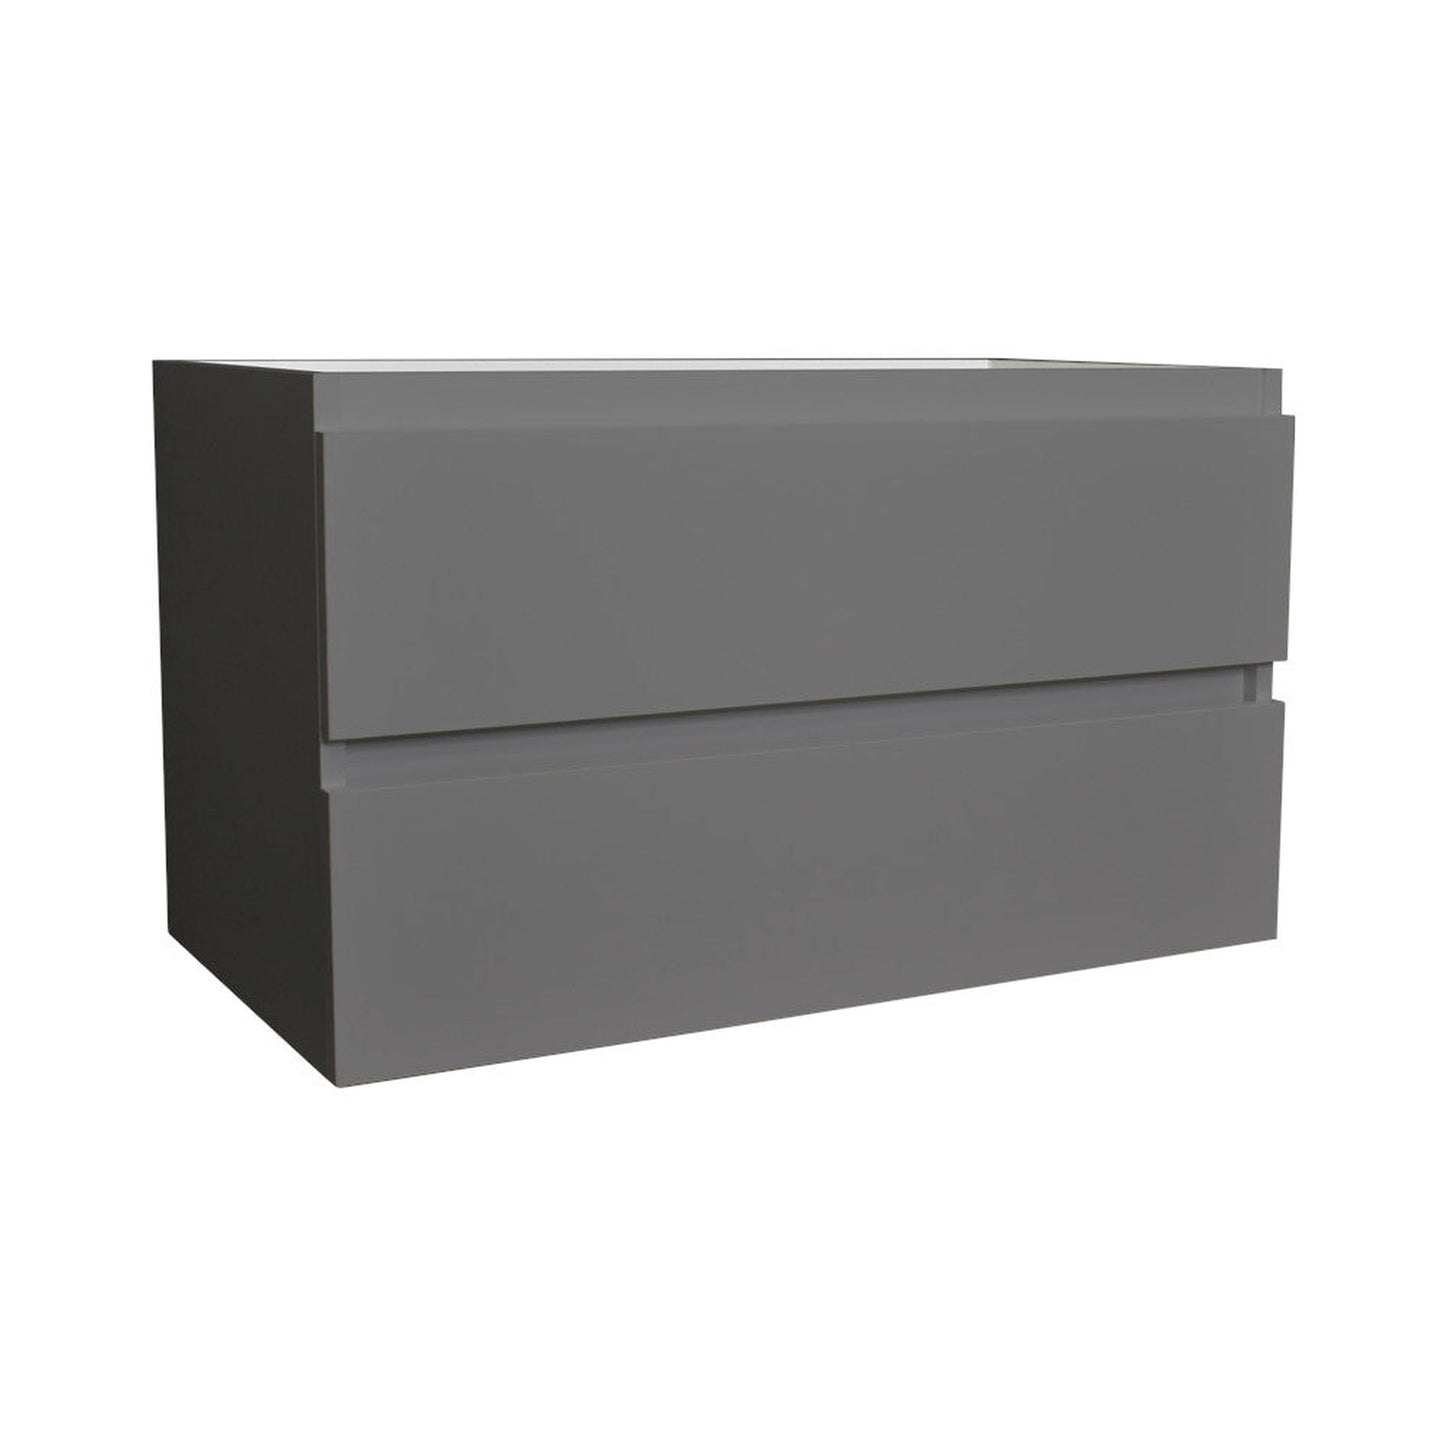 Volpa USA Salt 36" x 18" Gray Wall-Mounted Floating Bathroom Vanity Cabinet with Drawers